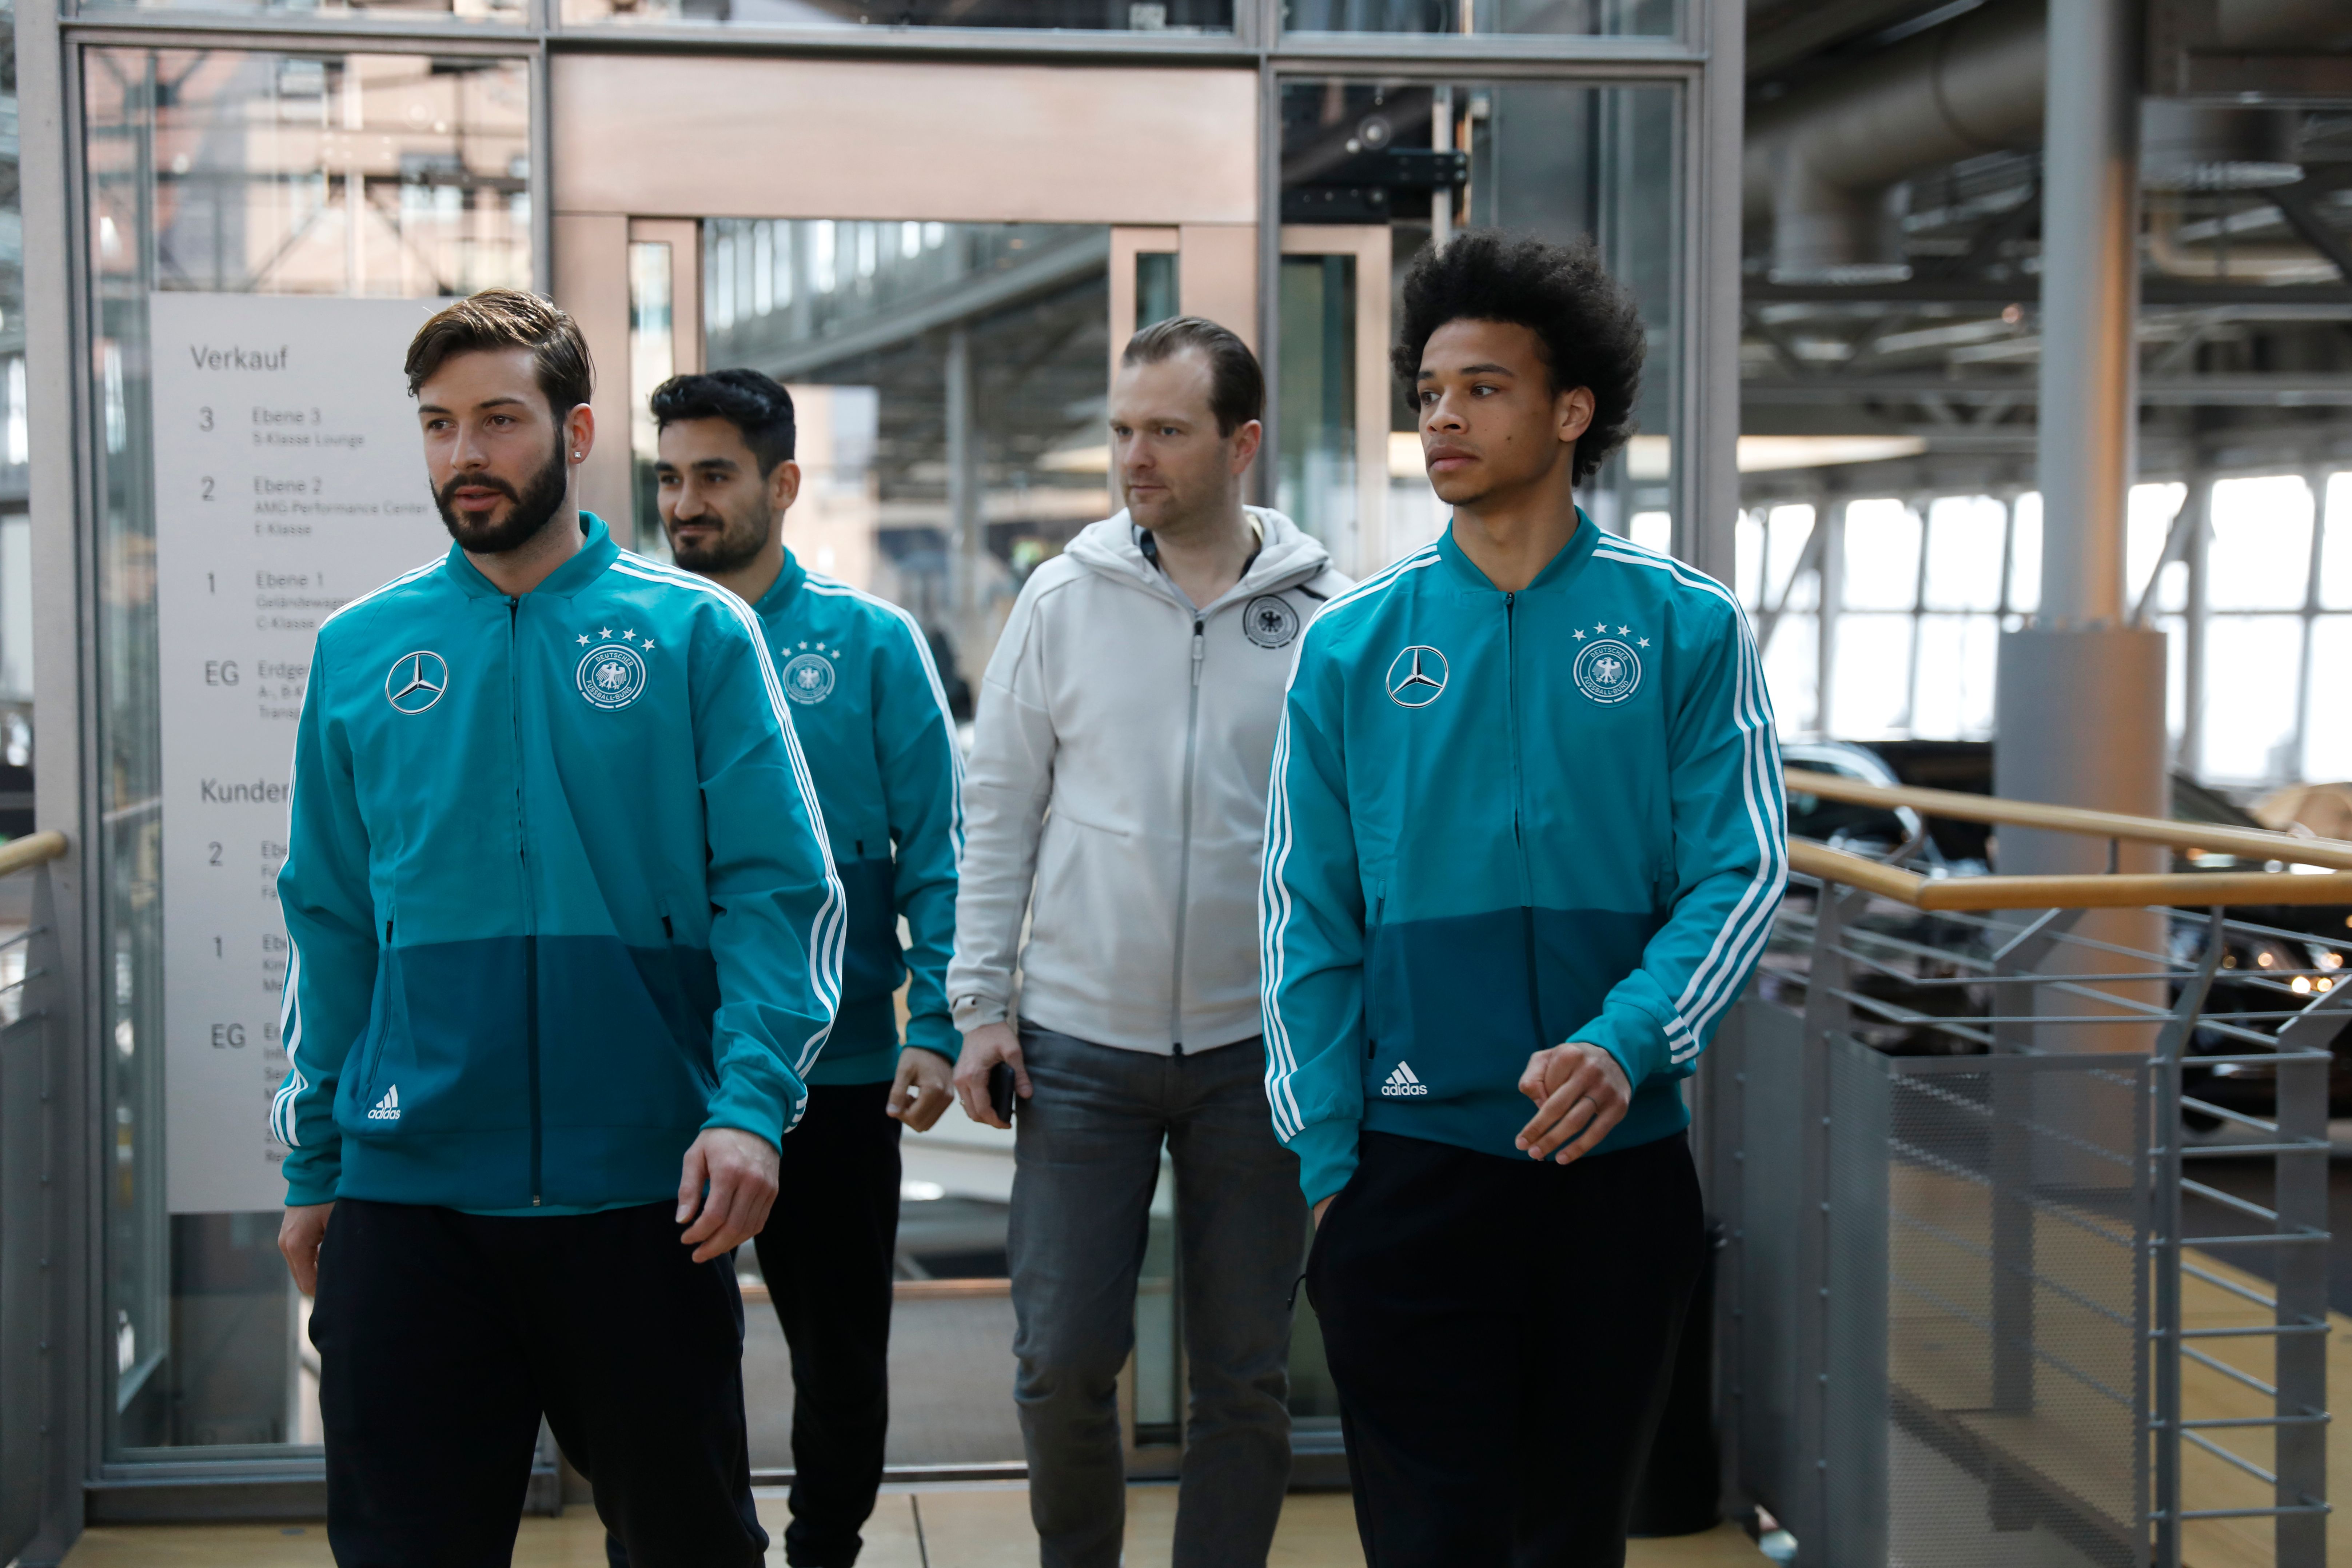 (LtoR) German defender Marvin Plattenhardt, German midfielder Leroy Sane and German midfielder Ilkay Gundogan (R) arrive to address a press conference of the German national football team in Berlin on March 25, 2018, ahead of their friendly football match against Brazil on March 27. / AFP PHOTO / Odd ANDERSEN        (Photo credit should read ODD ANDERSEN/AFP/Getty Images)